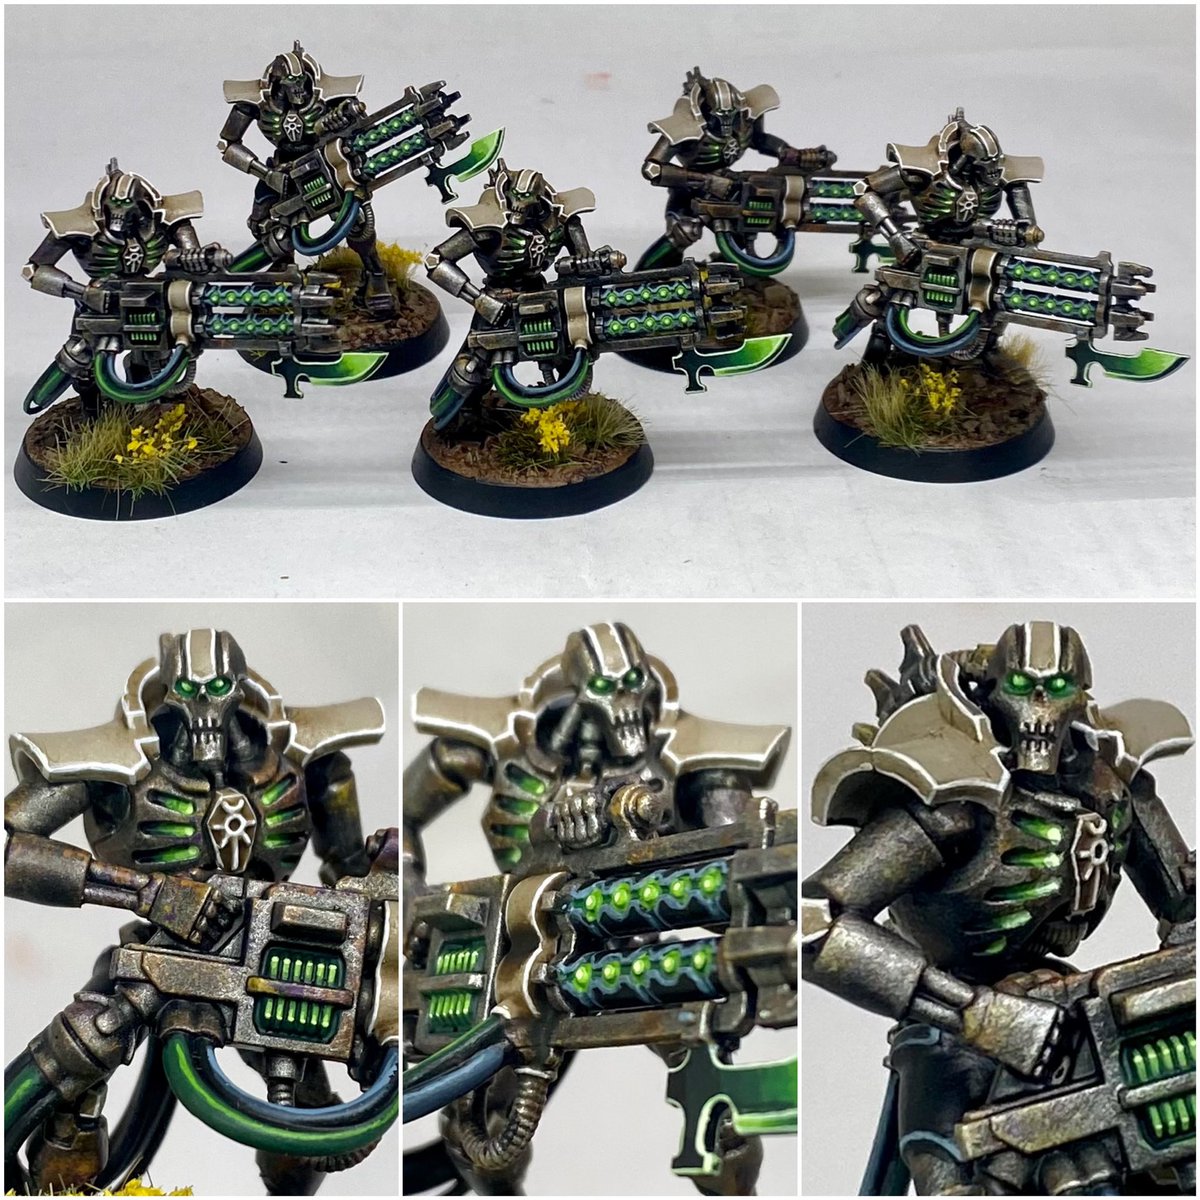 Super quick Necron Immortals. They’ll do for an evening’s painting…
#WarhammerCommunity #Necrons #PaintingWarhammer #Warhammer40k